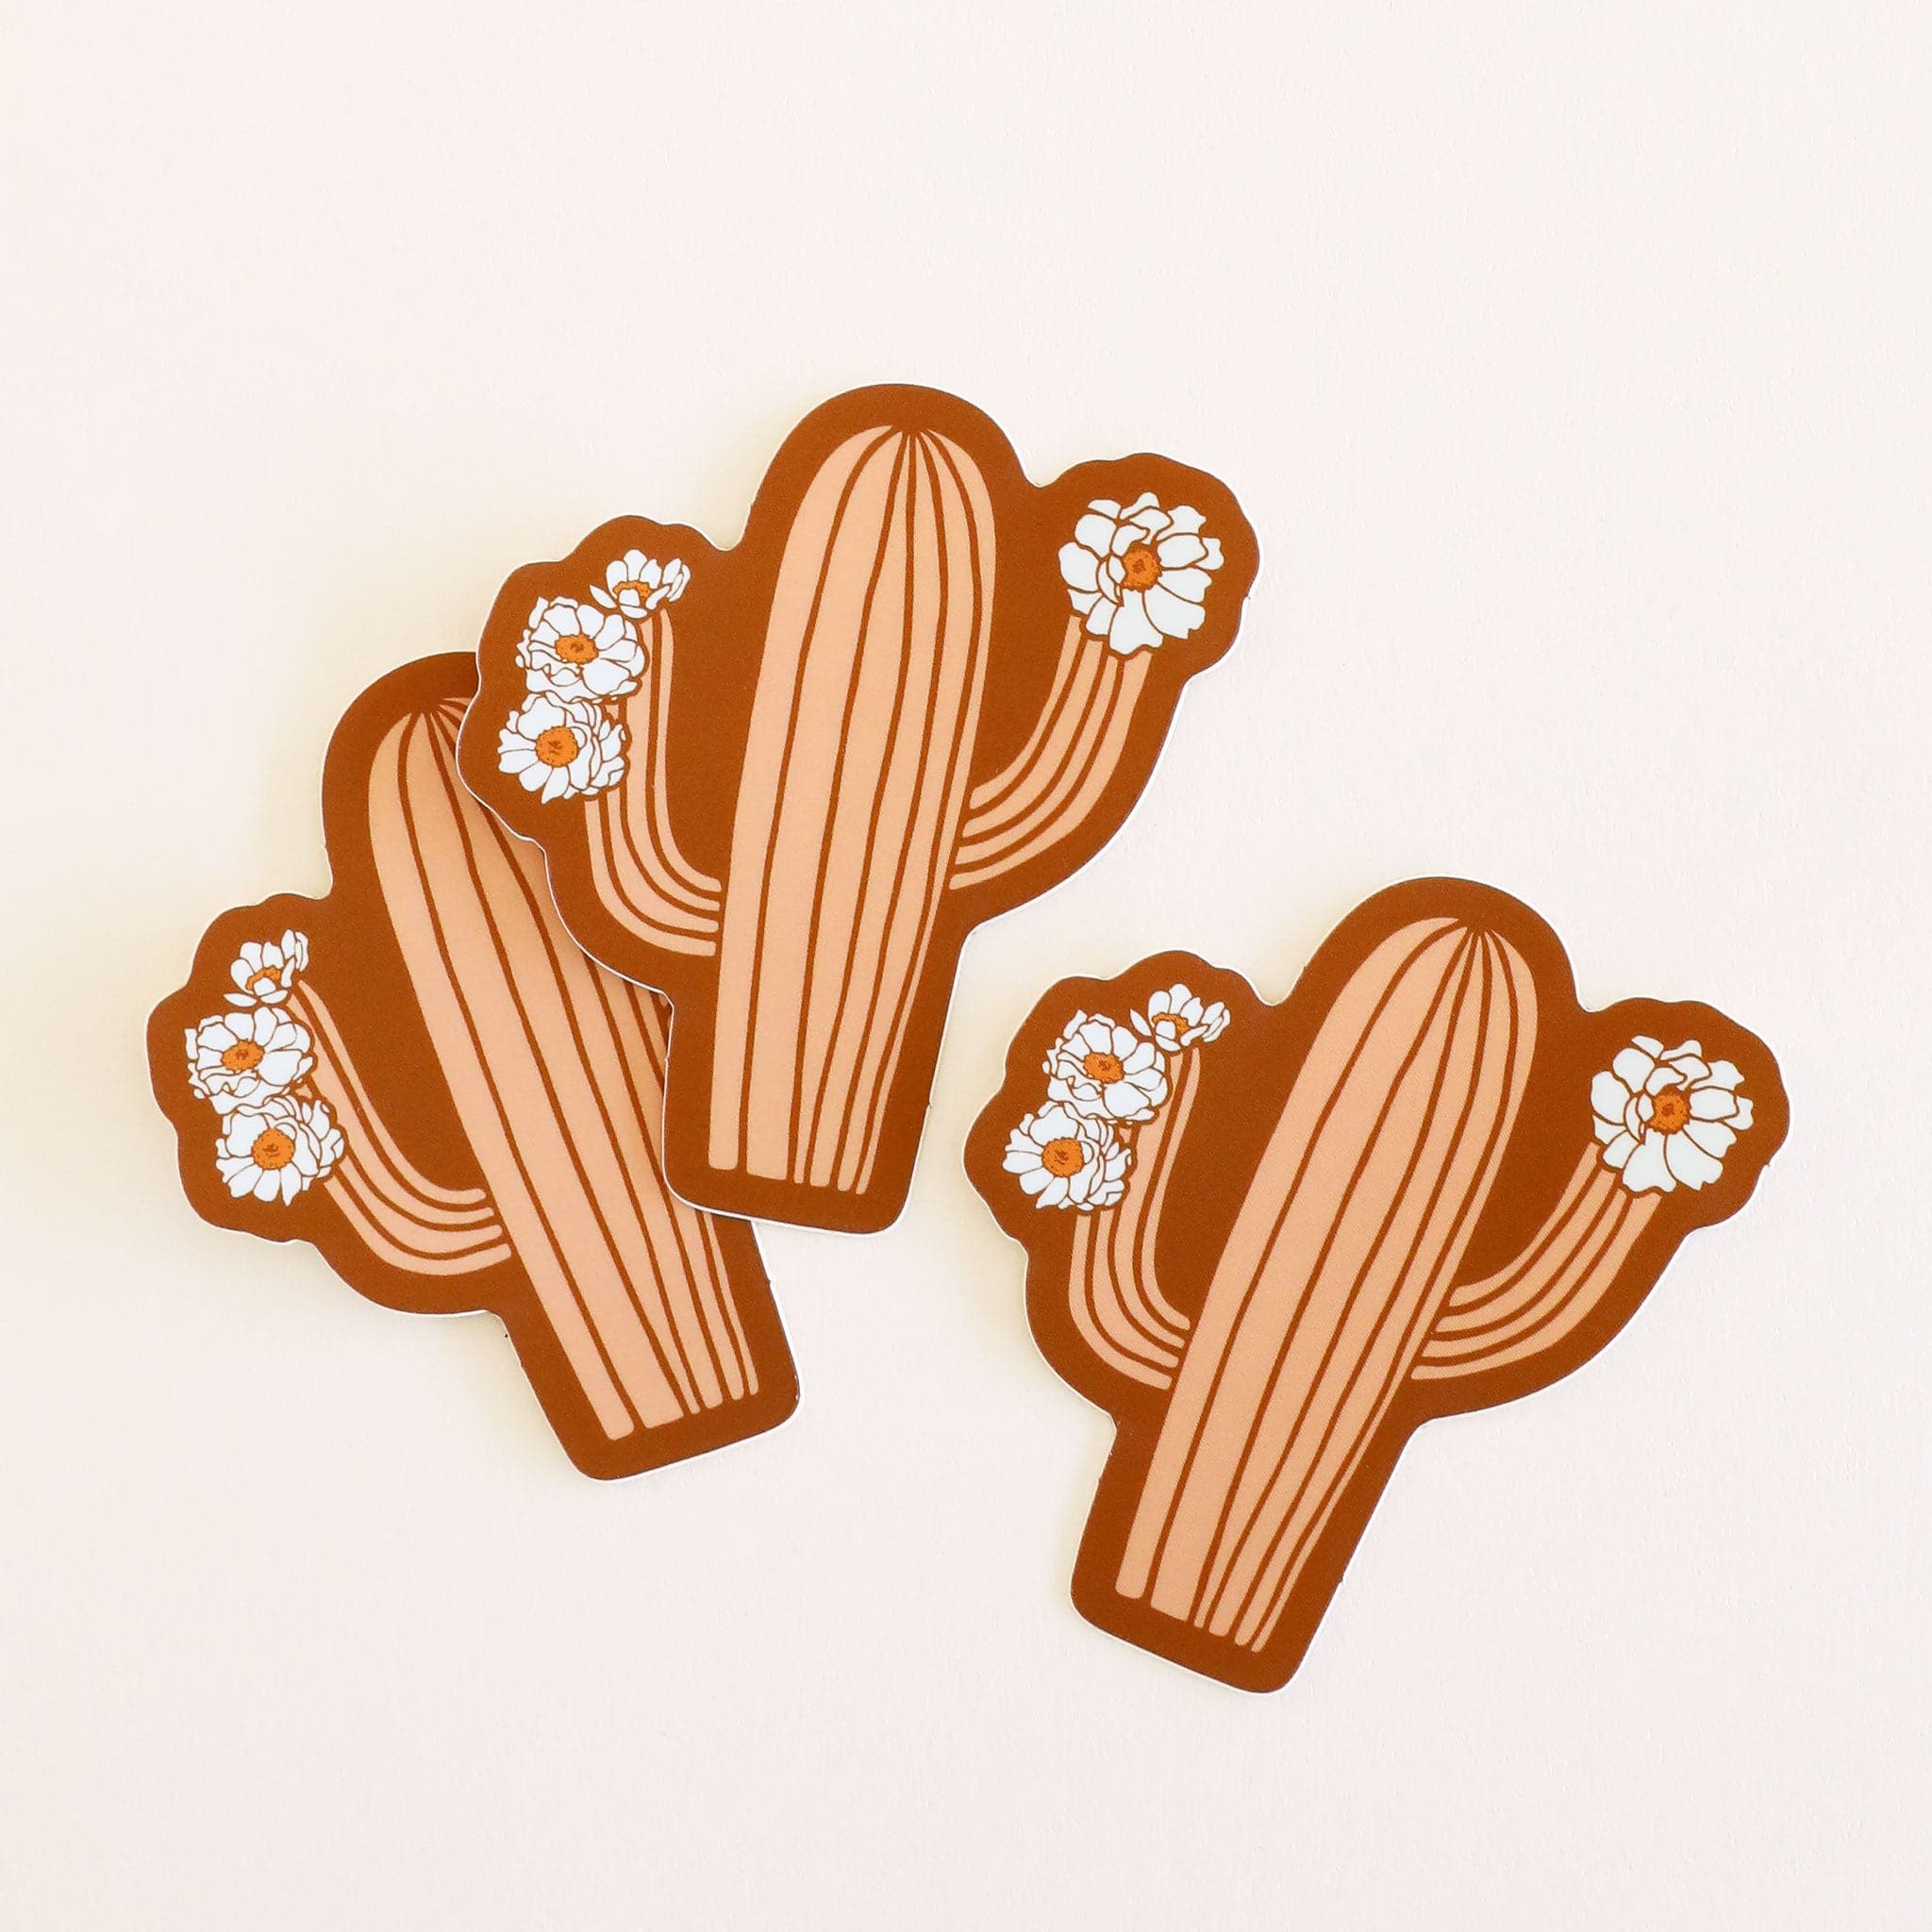 Three salmon pink cactus stickers with cactus flowers on each arm.